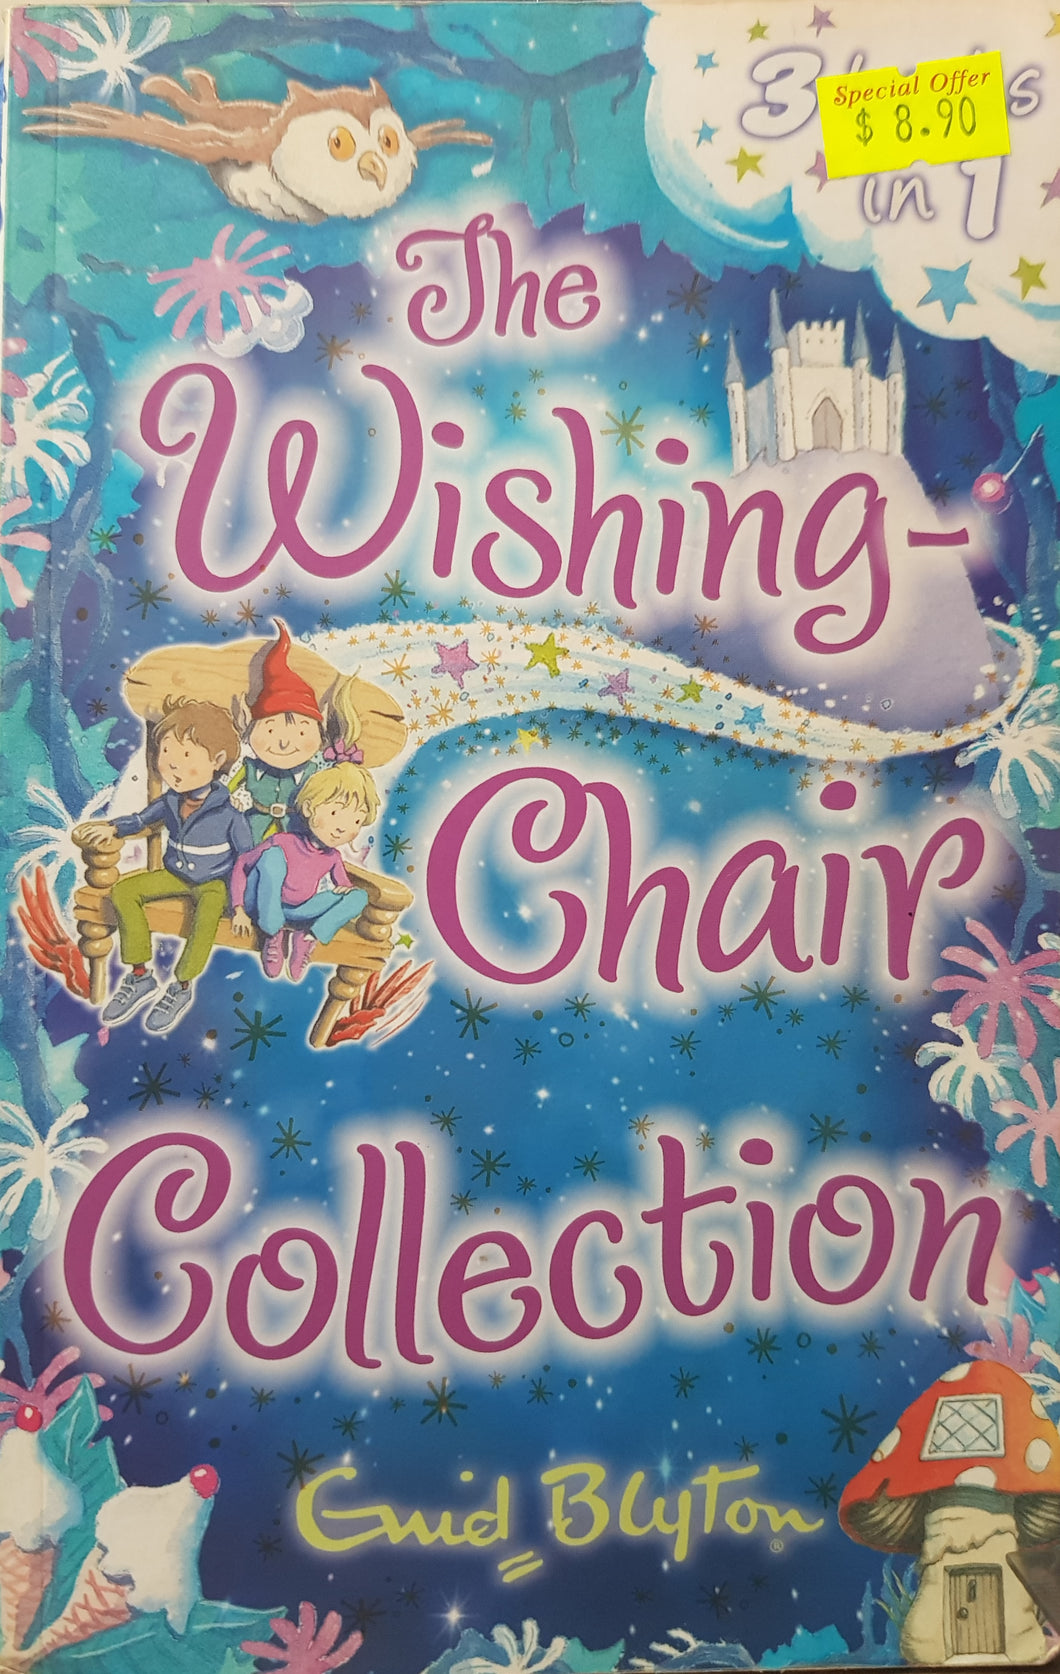 The Wishing-Chair Collection - Enid Blyton